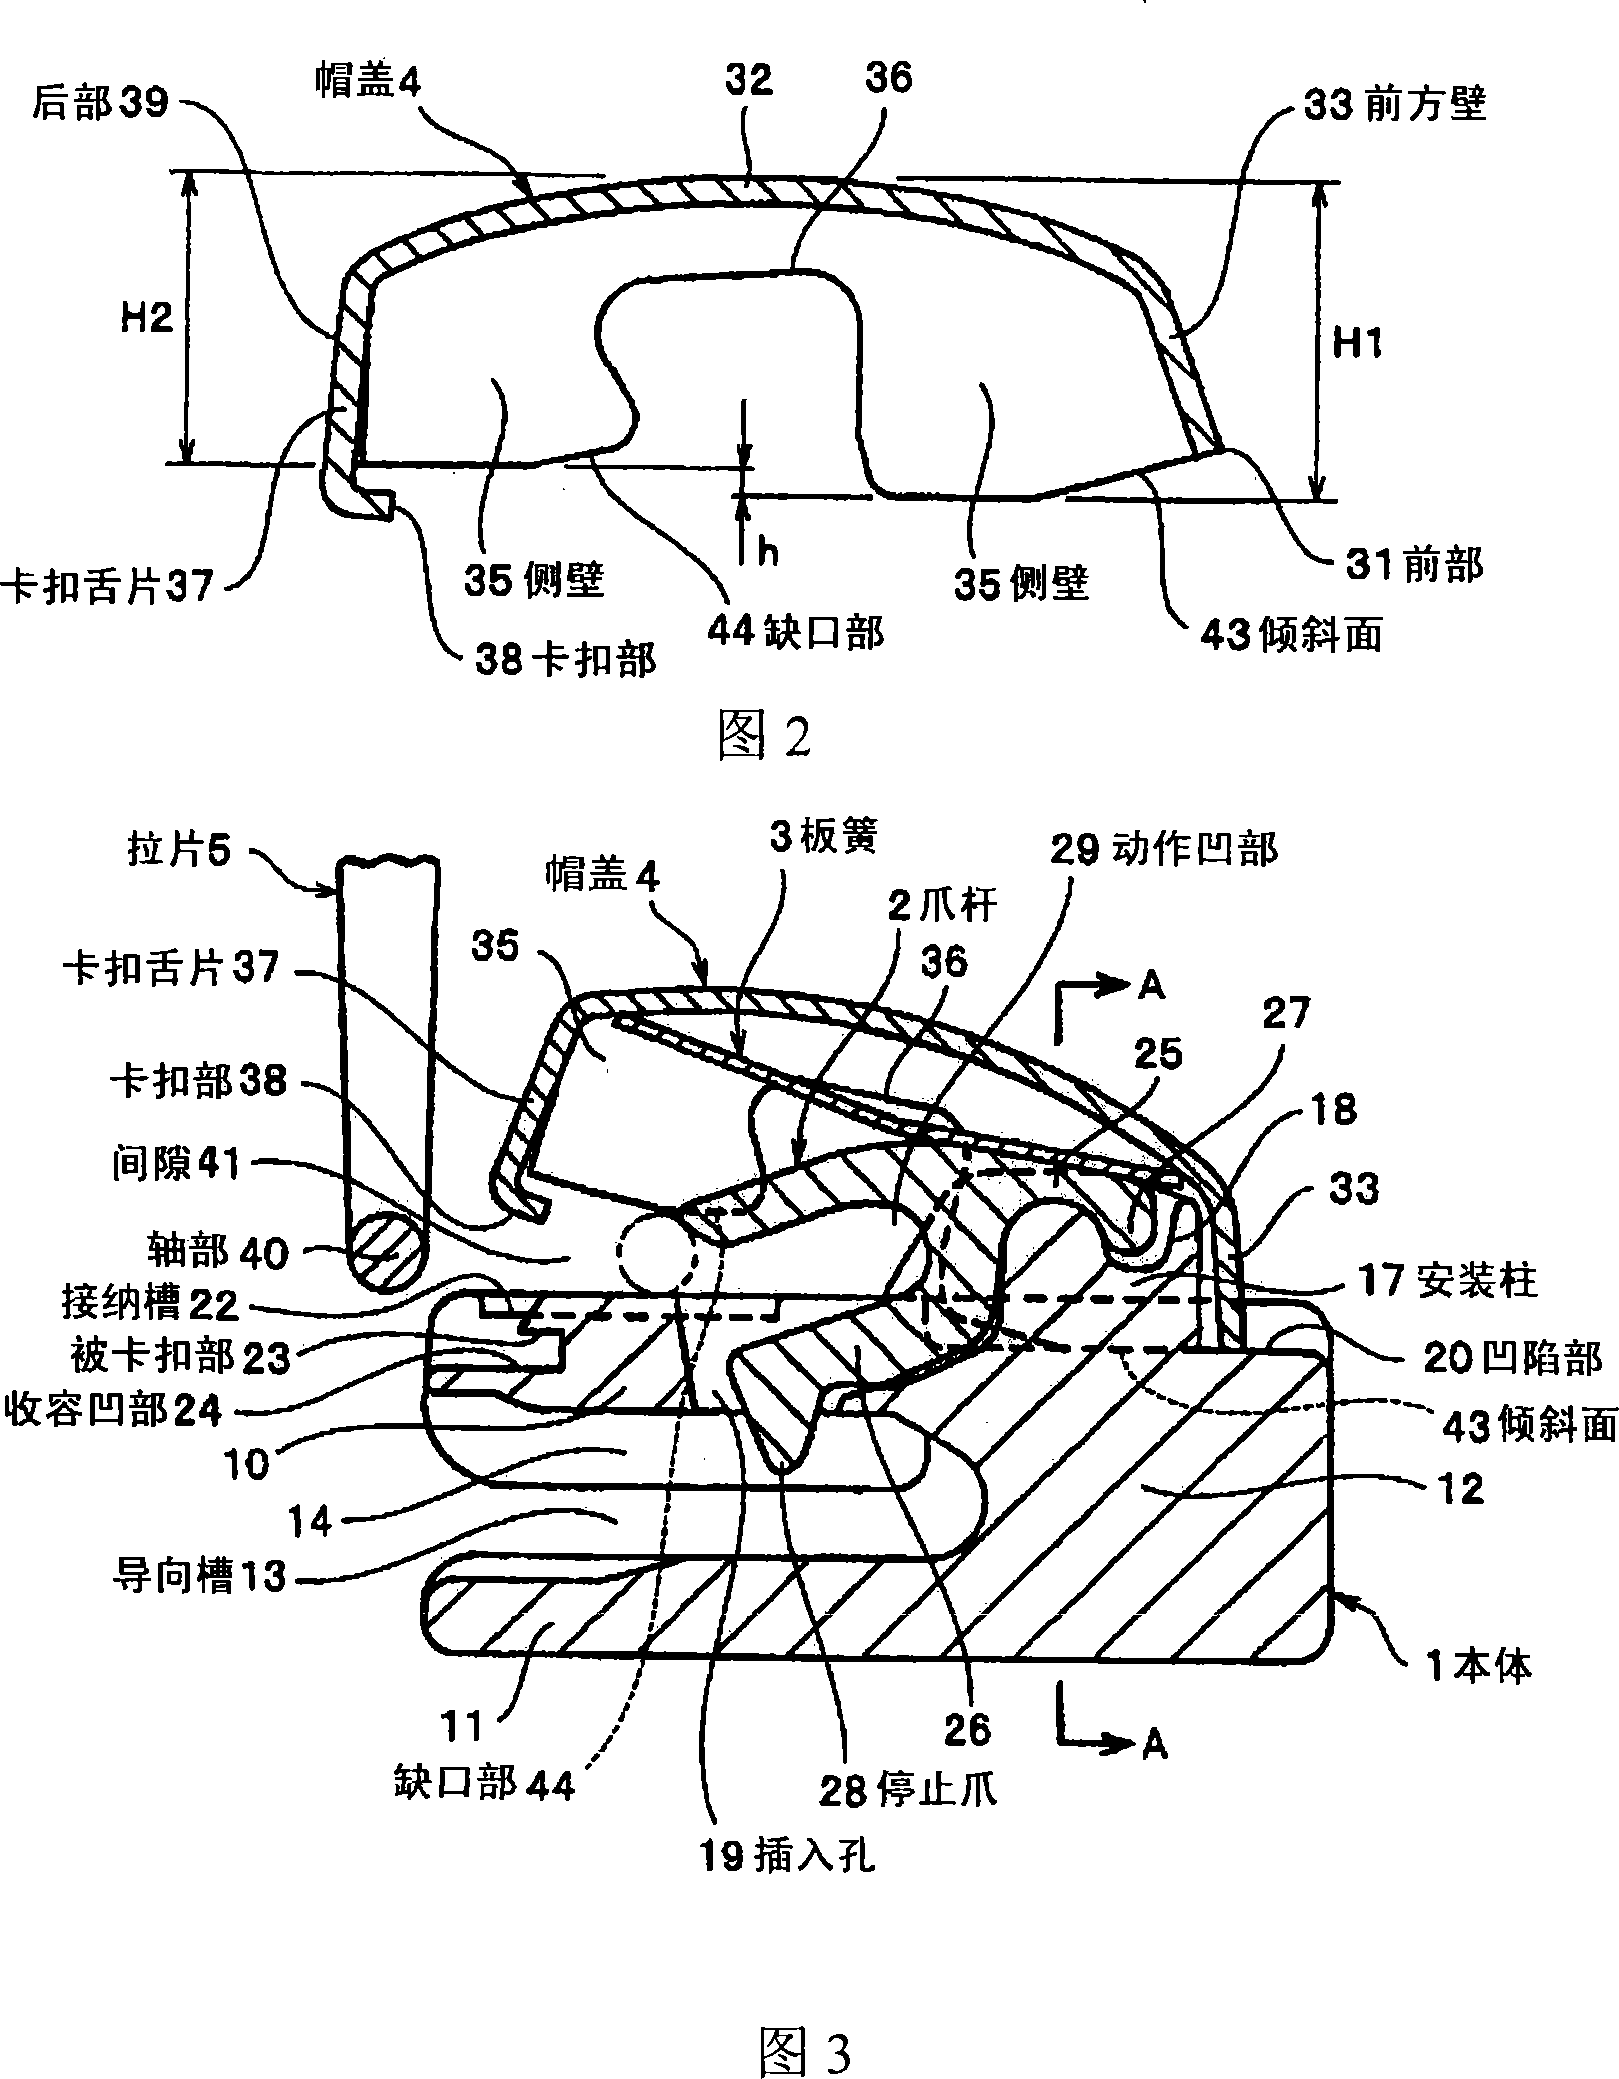 Slide fastener with automatic stop device